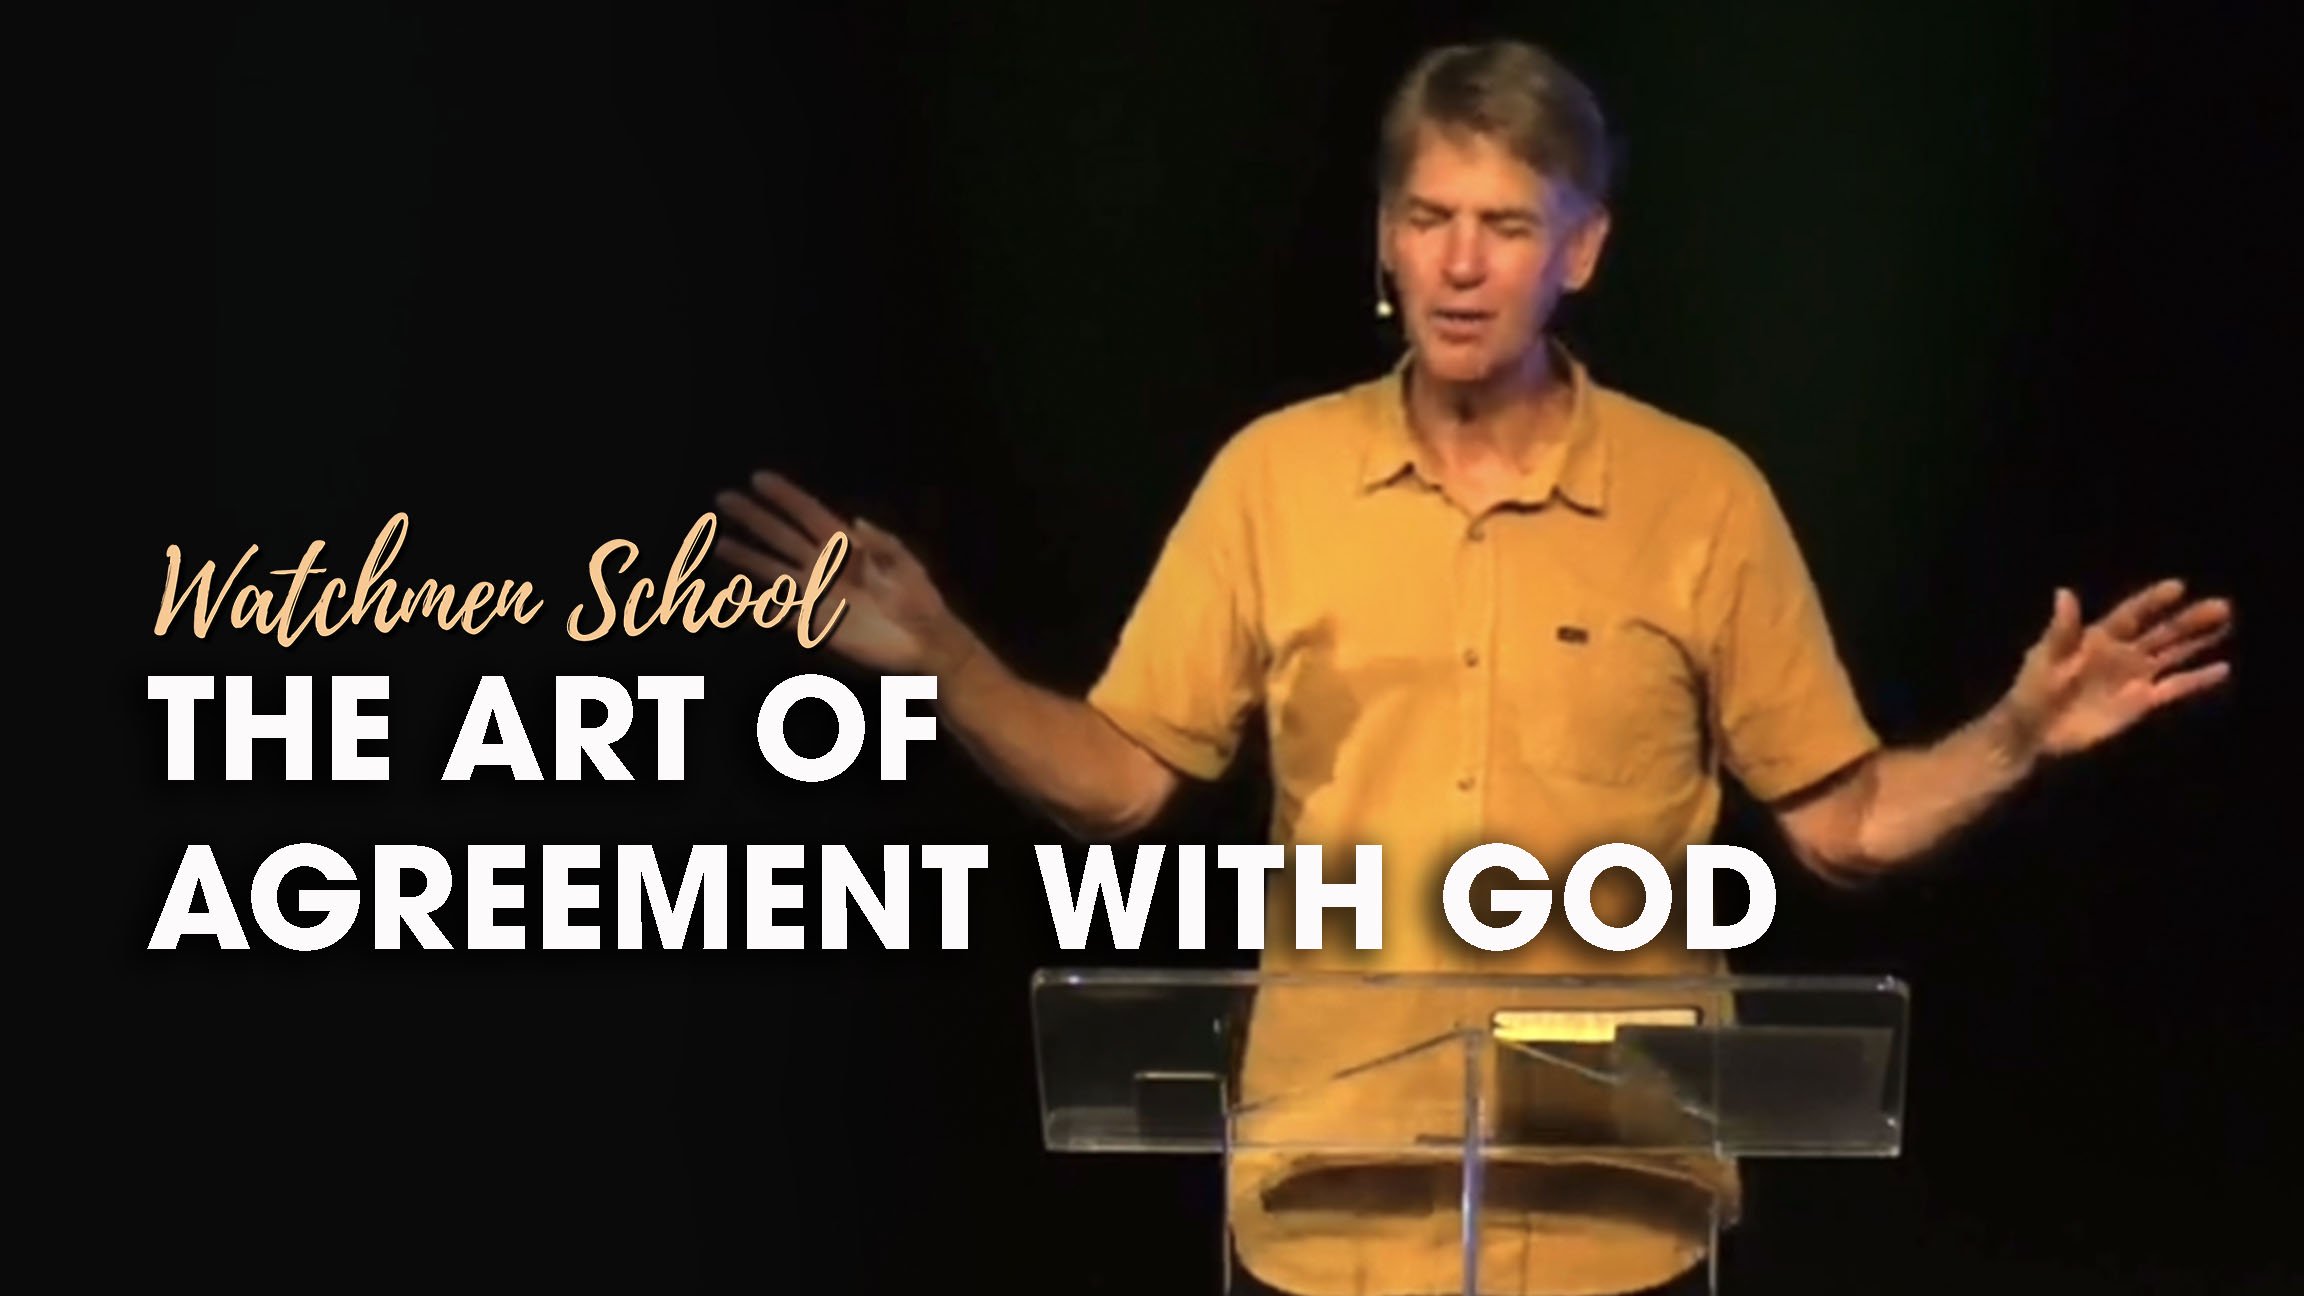 Watchmen School – The Art of Agreement with God